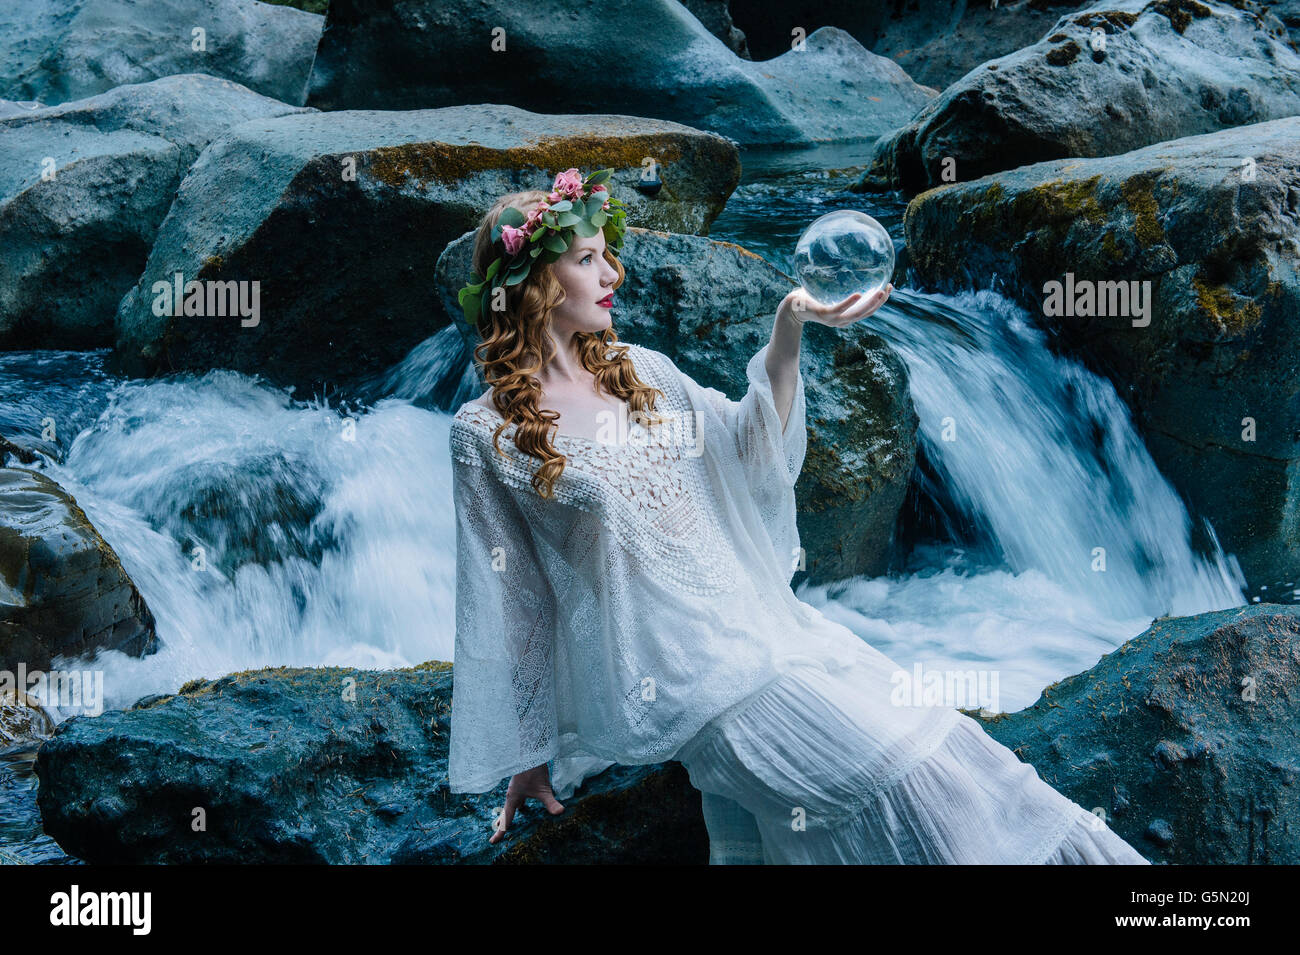 Caucasian woman holding crystal ball at river waterfall Banque D'Images